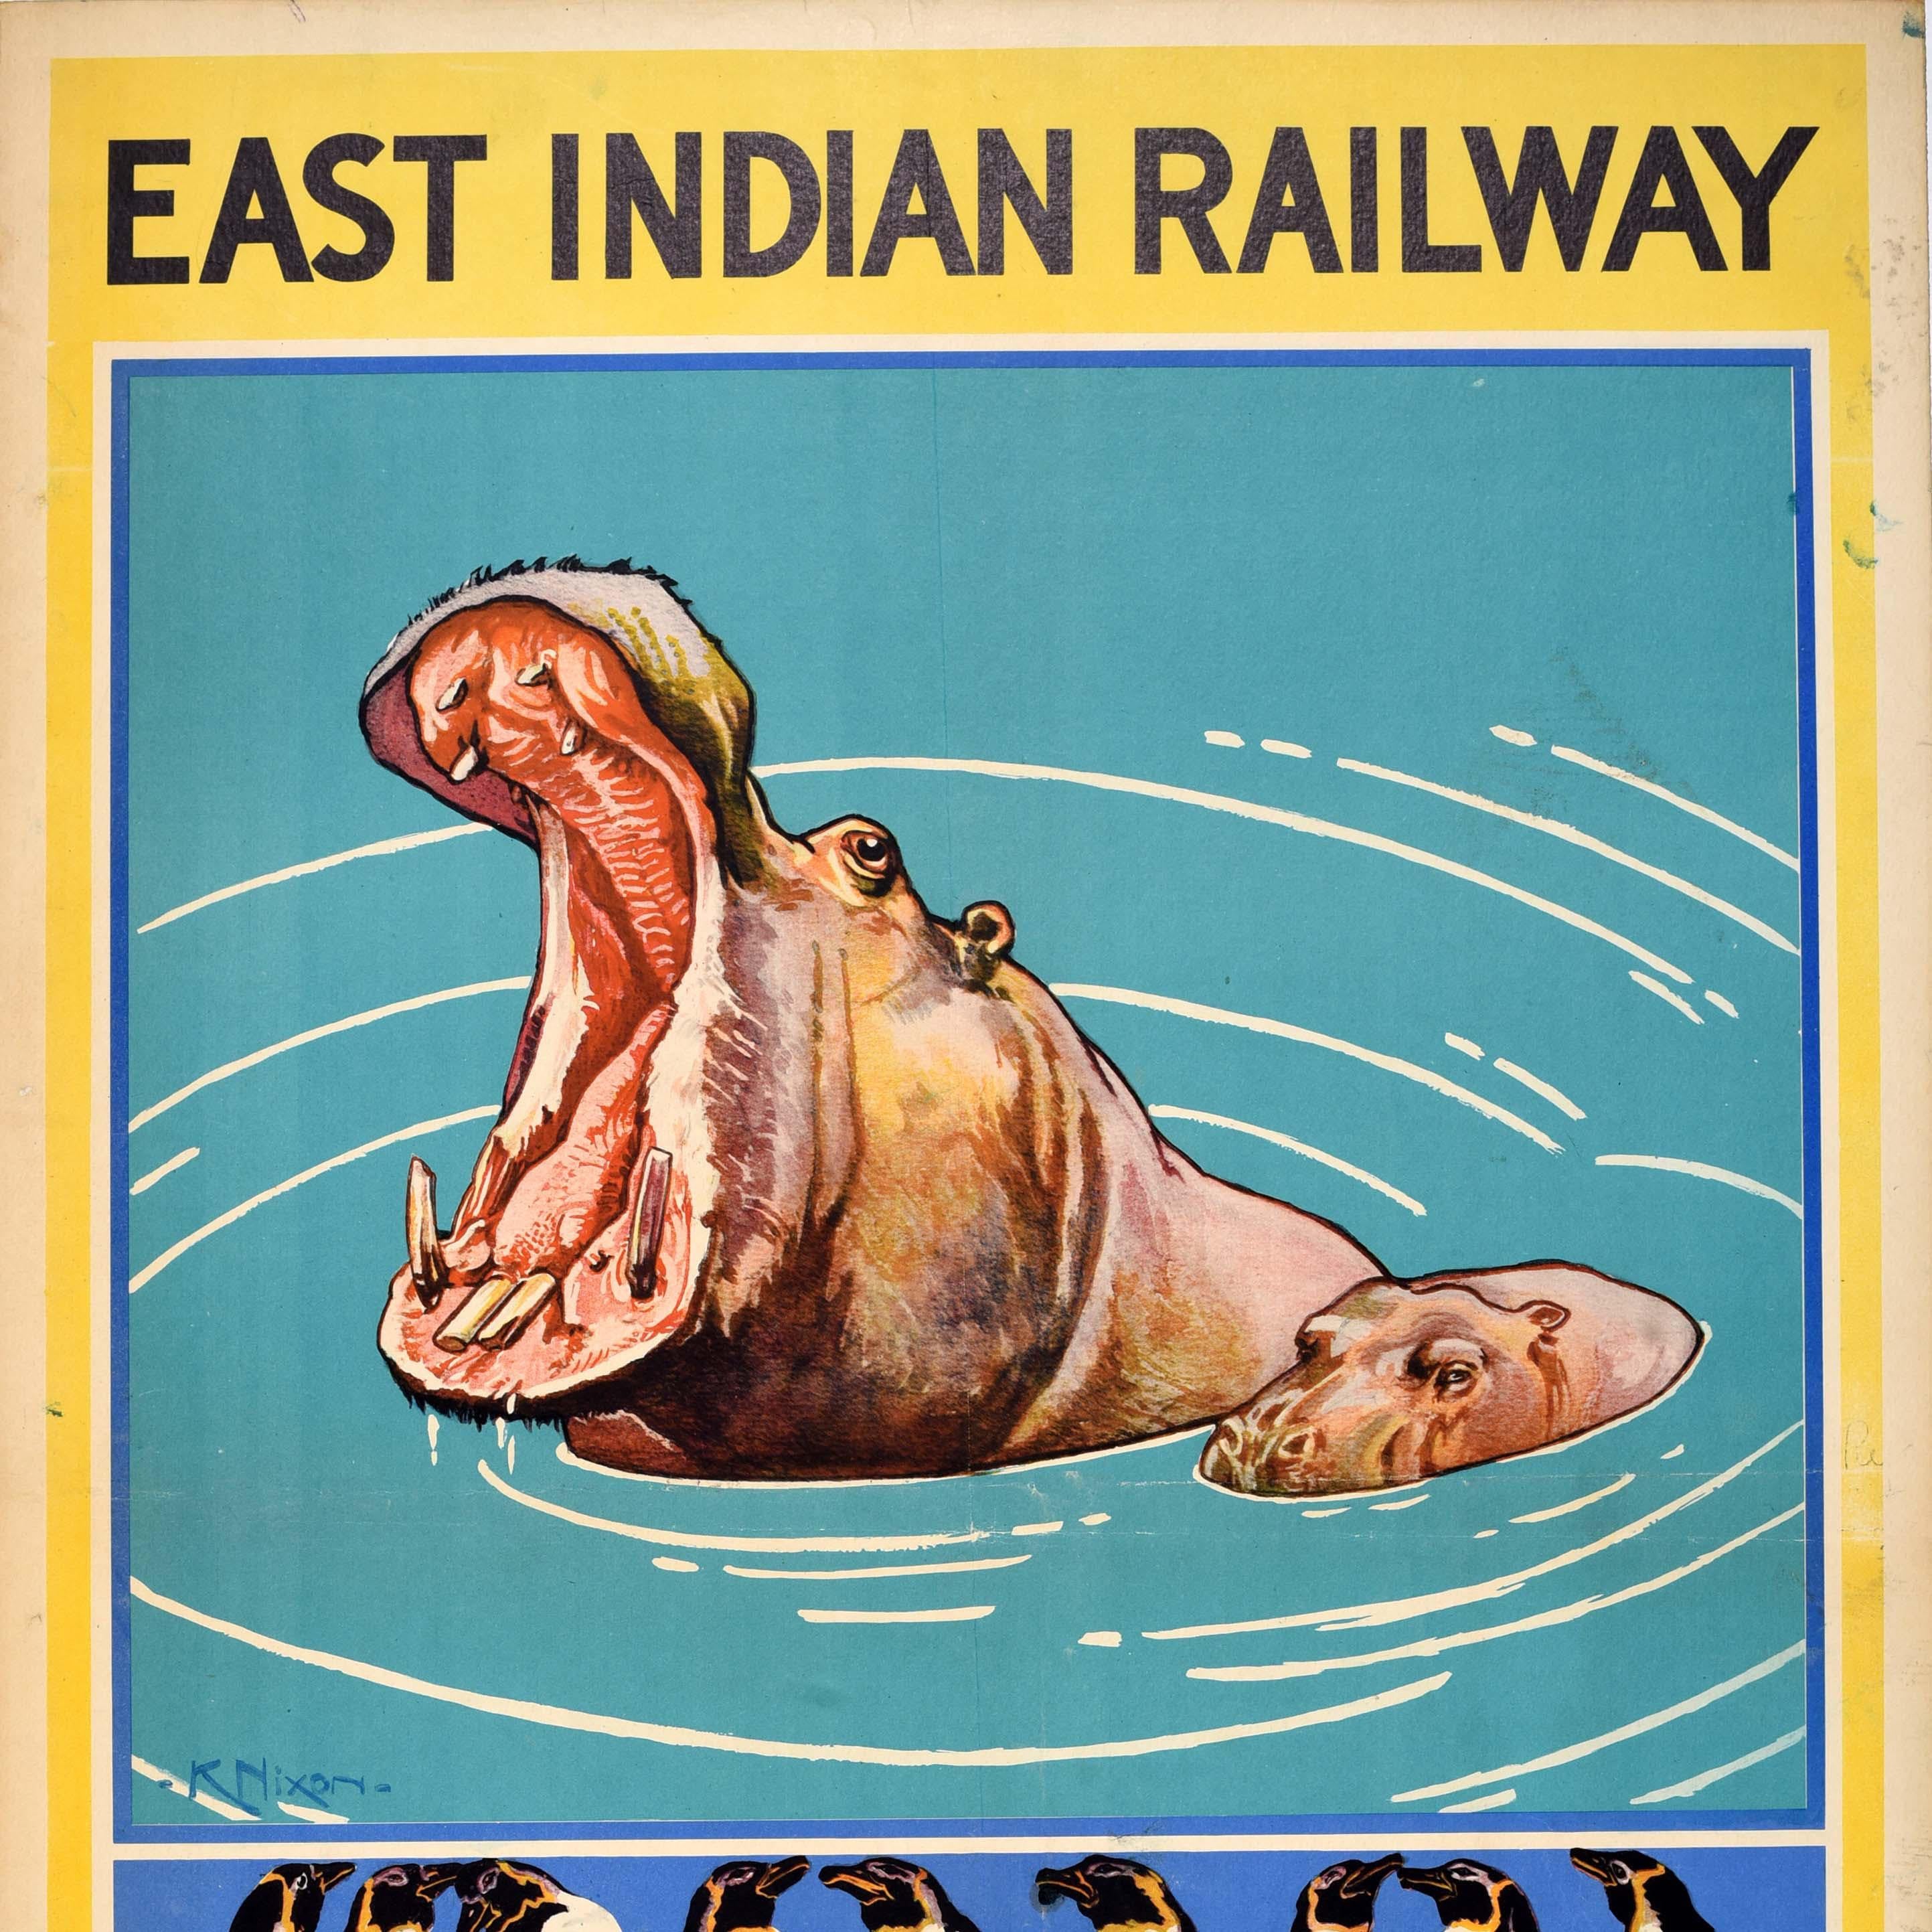 Original vintage Asia travel poster issued by the East Indian Railway (1845-1952) - See the Calcutta Zoo - featuring a great design by Kay Nixon (Kathleen Irene Nixon; 1895-1988) of a mother hippopotamus with her mouth wide open in the water next to